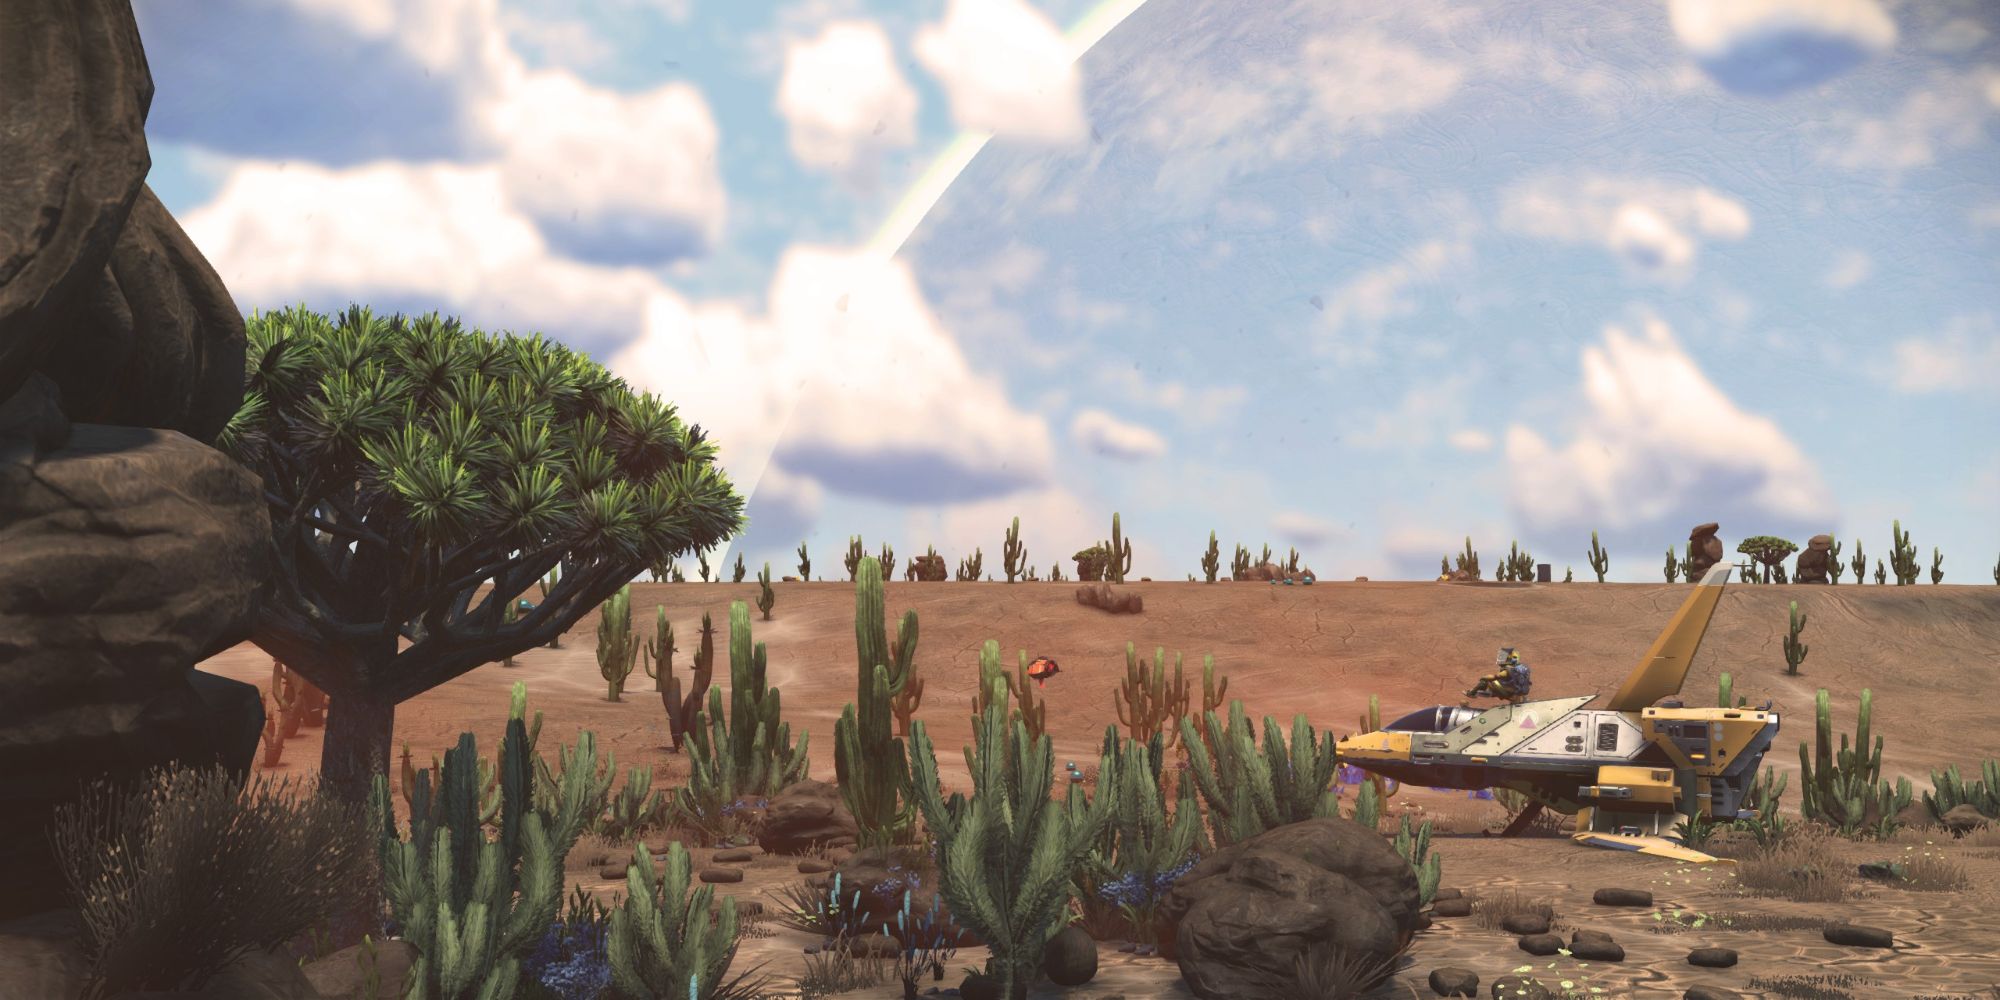 A photo of a Barren Planet from No Man's Sky, with the playable character resting on their ship in the middle of a desert landscape.